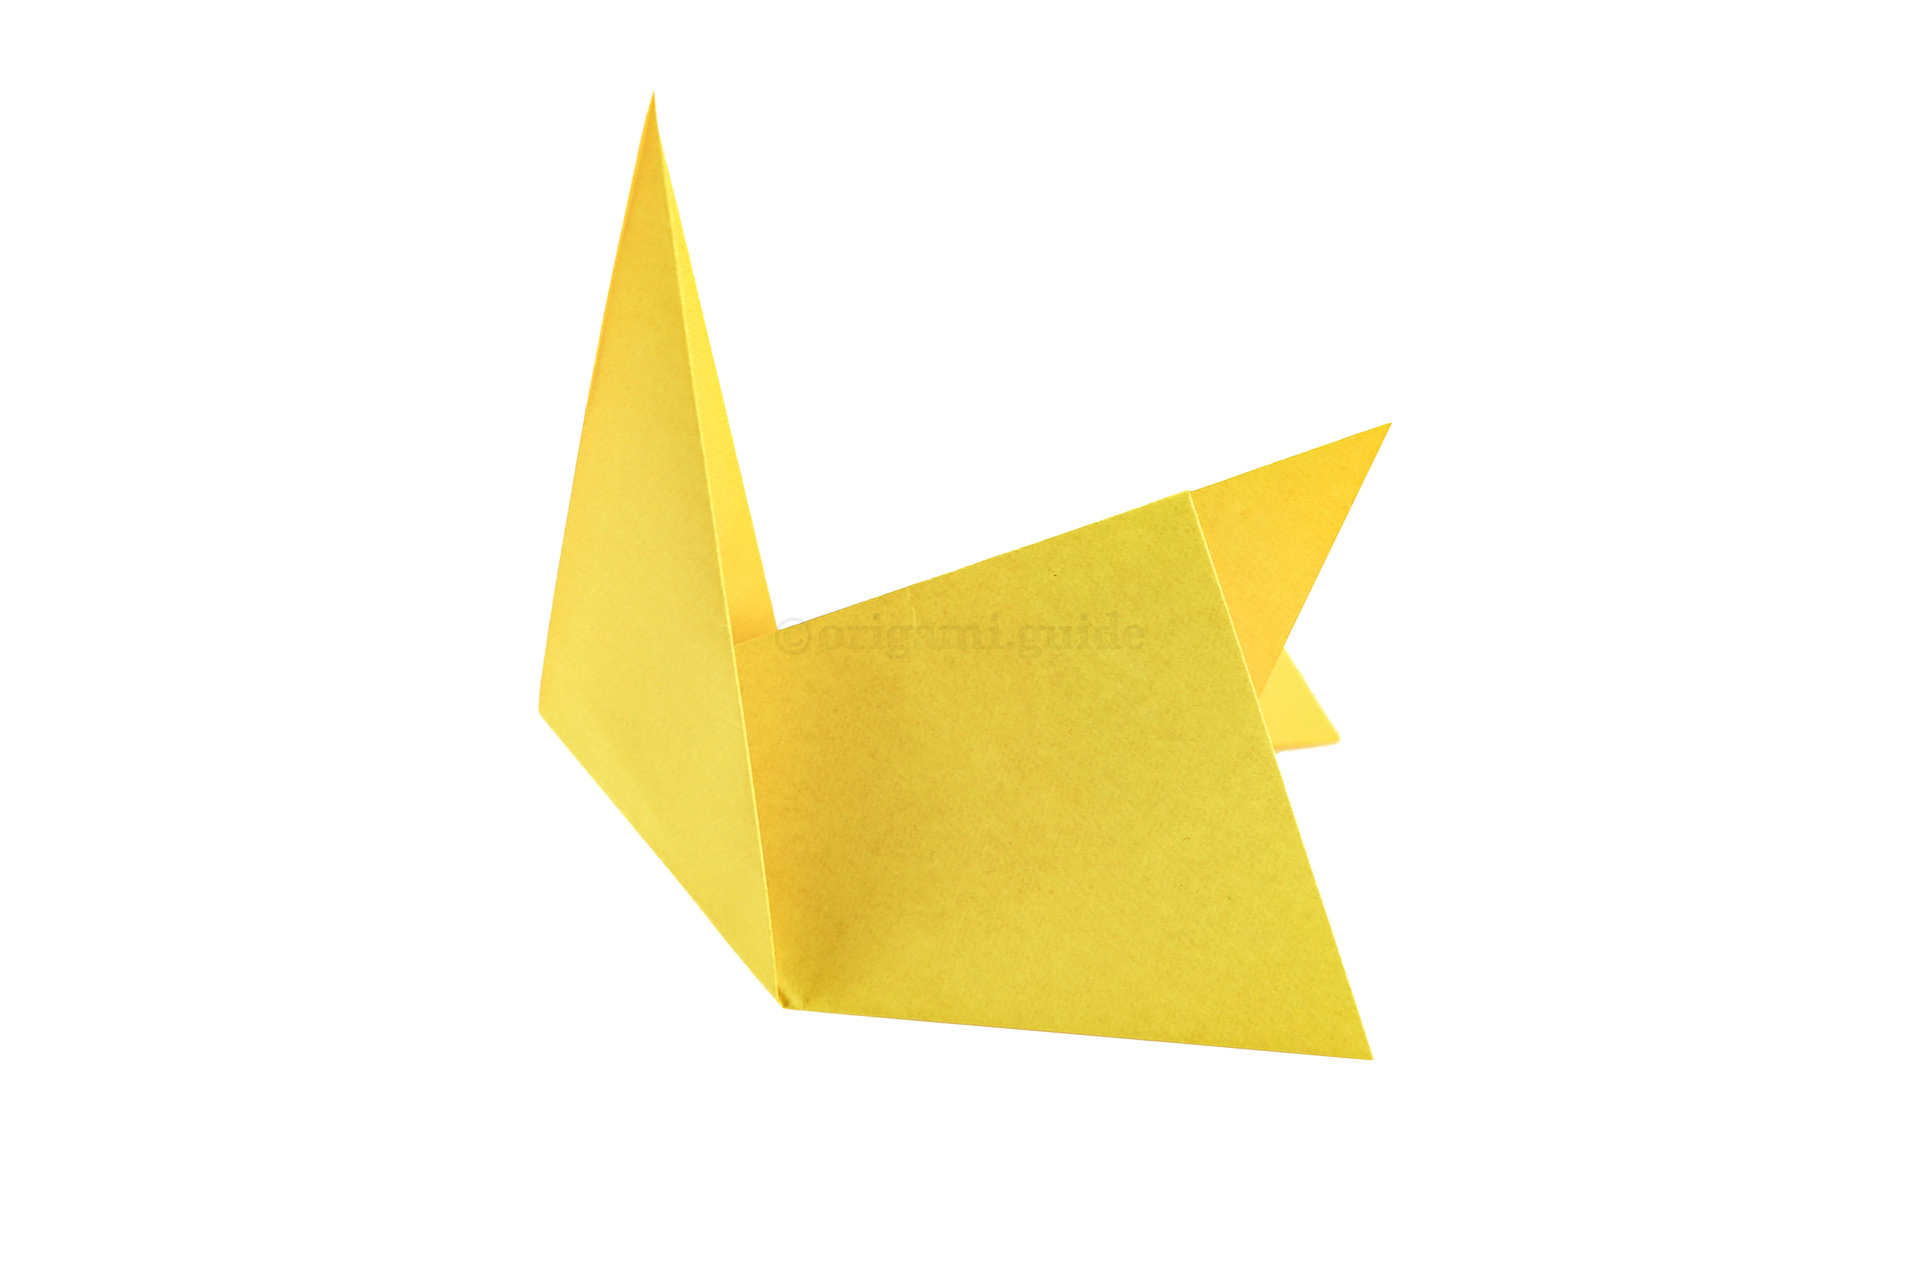 The simple origami rabbit is complete, you can make a cute face by drawing eyes, a nose and whiskers.